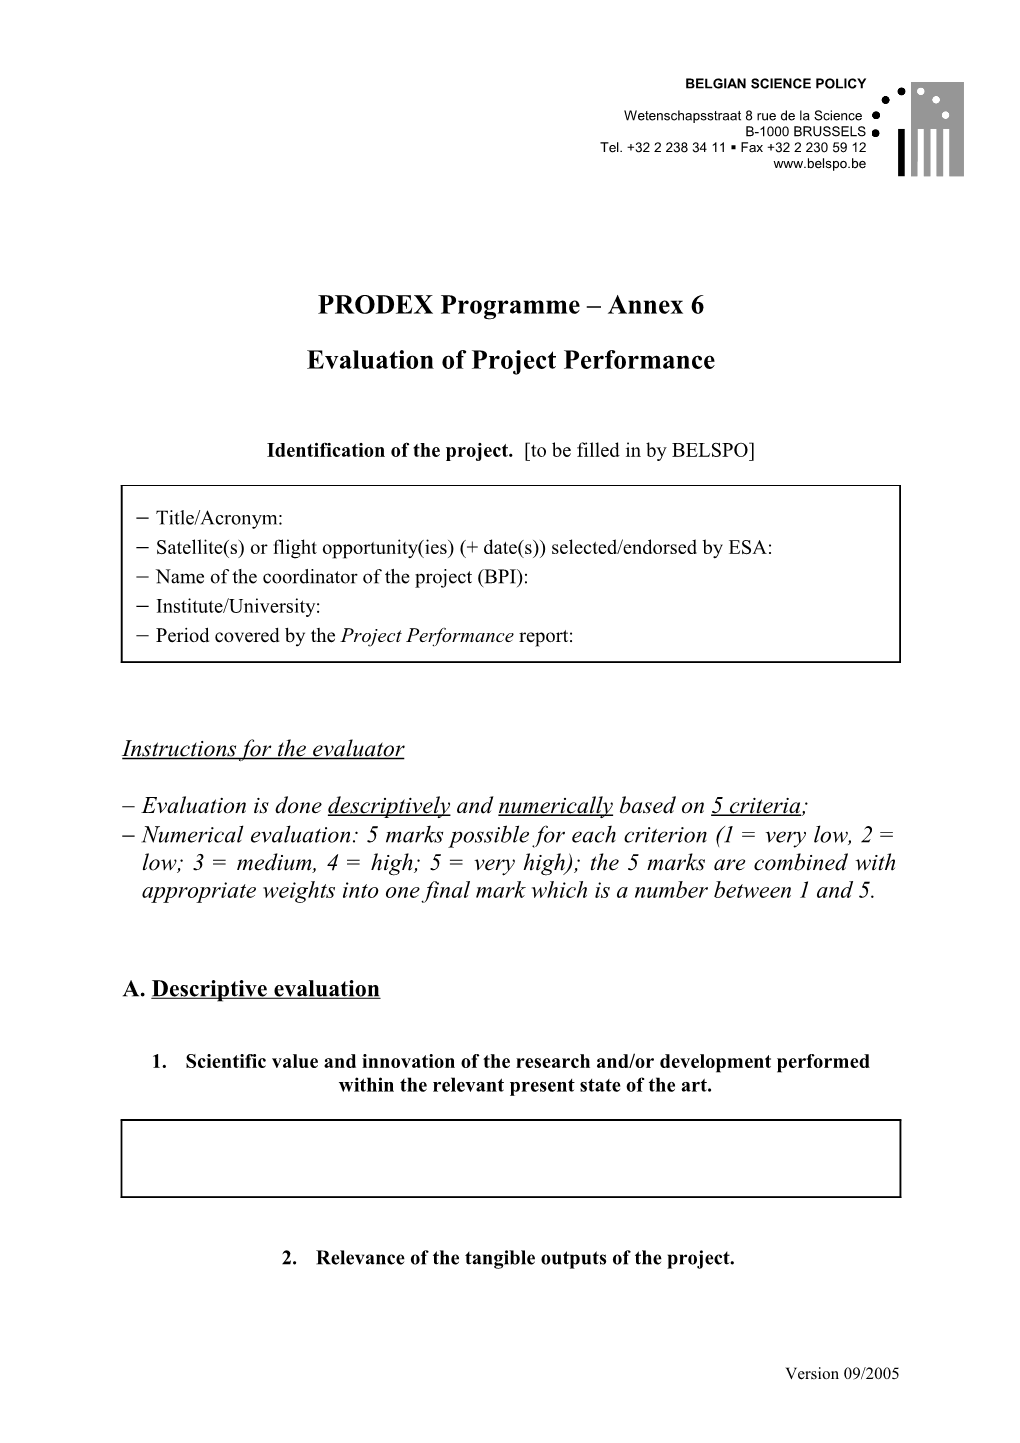 Annex 6: Evaluation of Project Performance